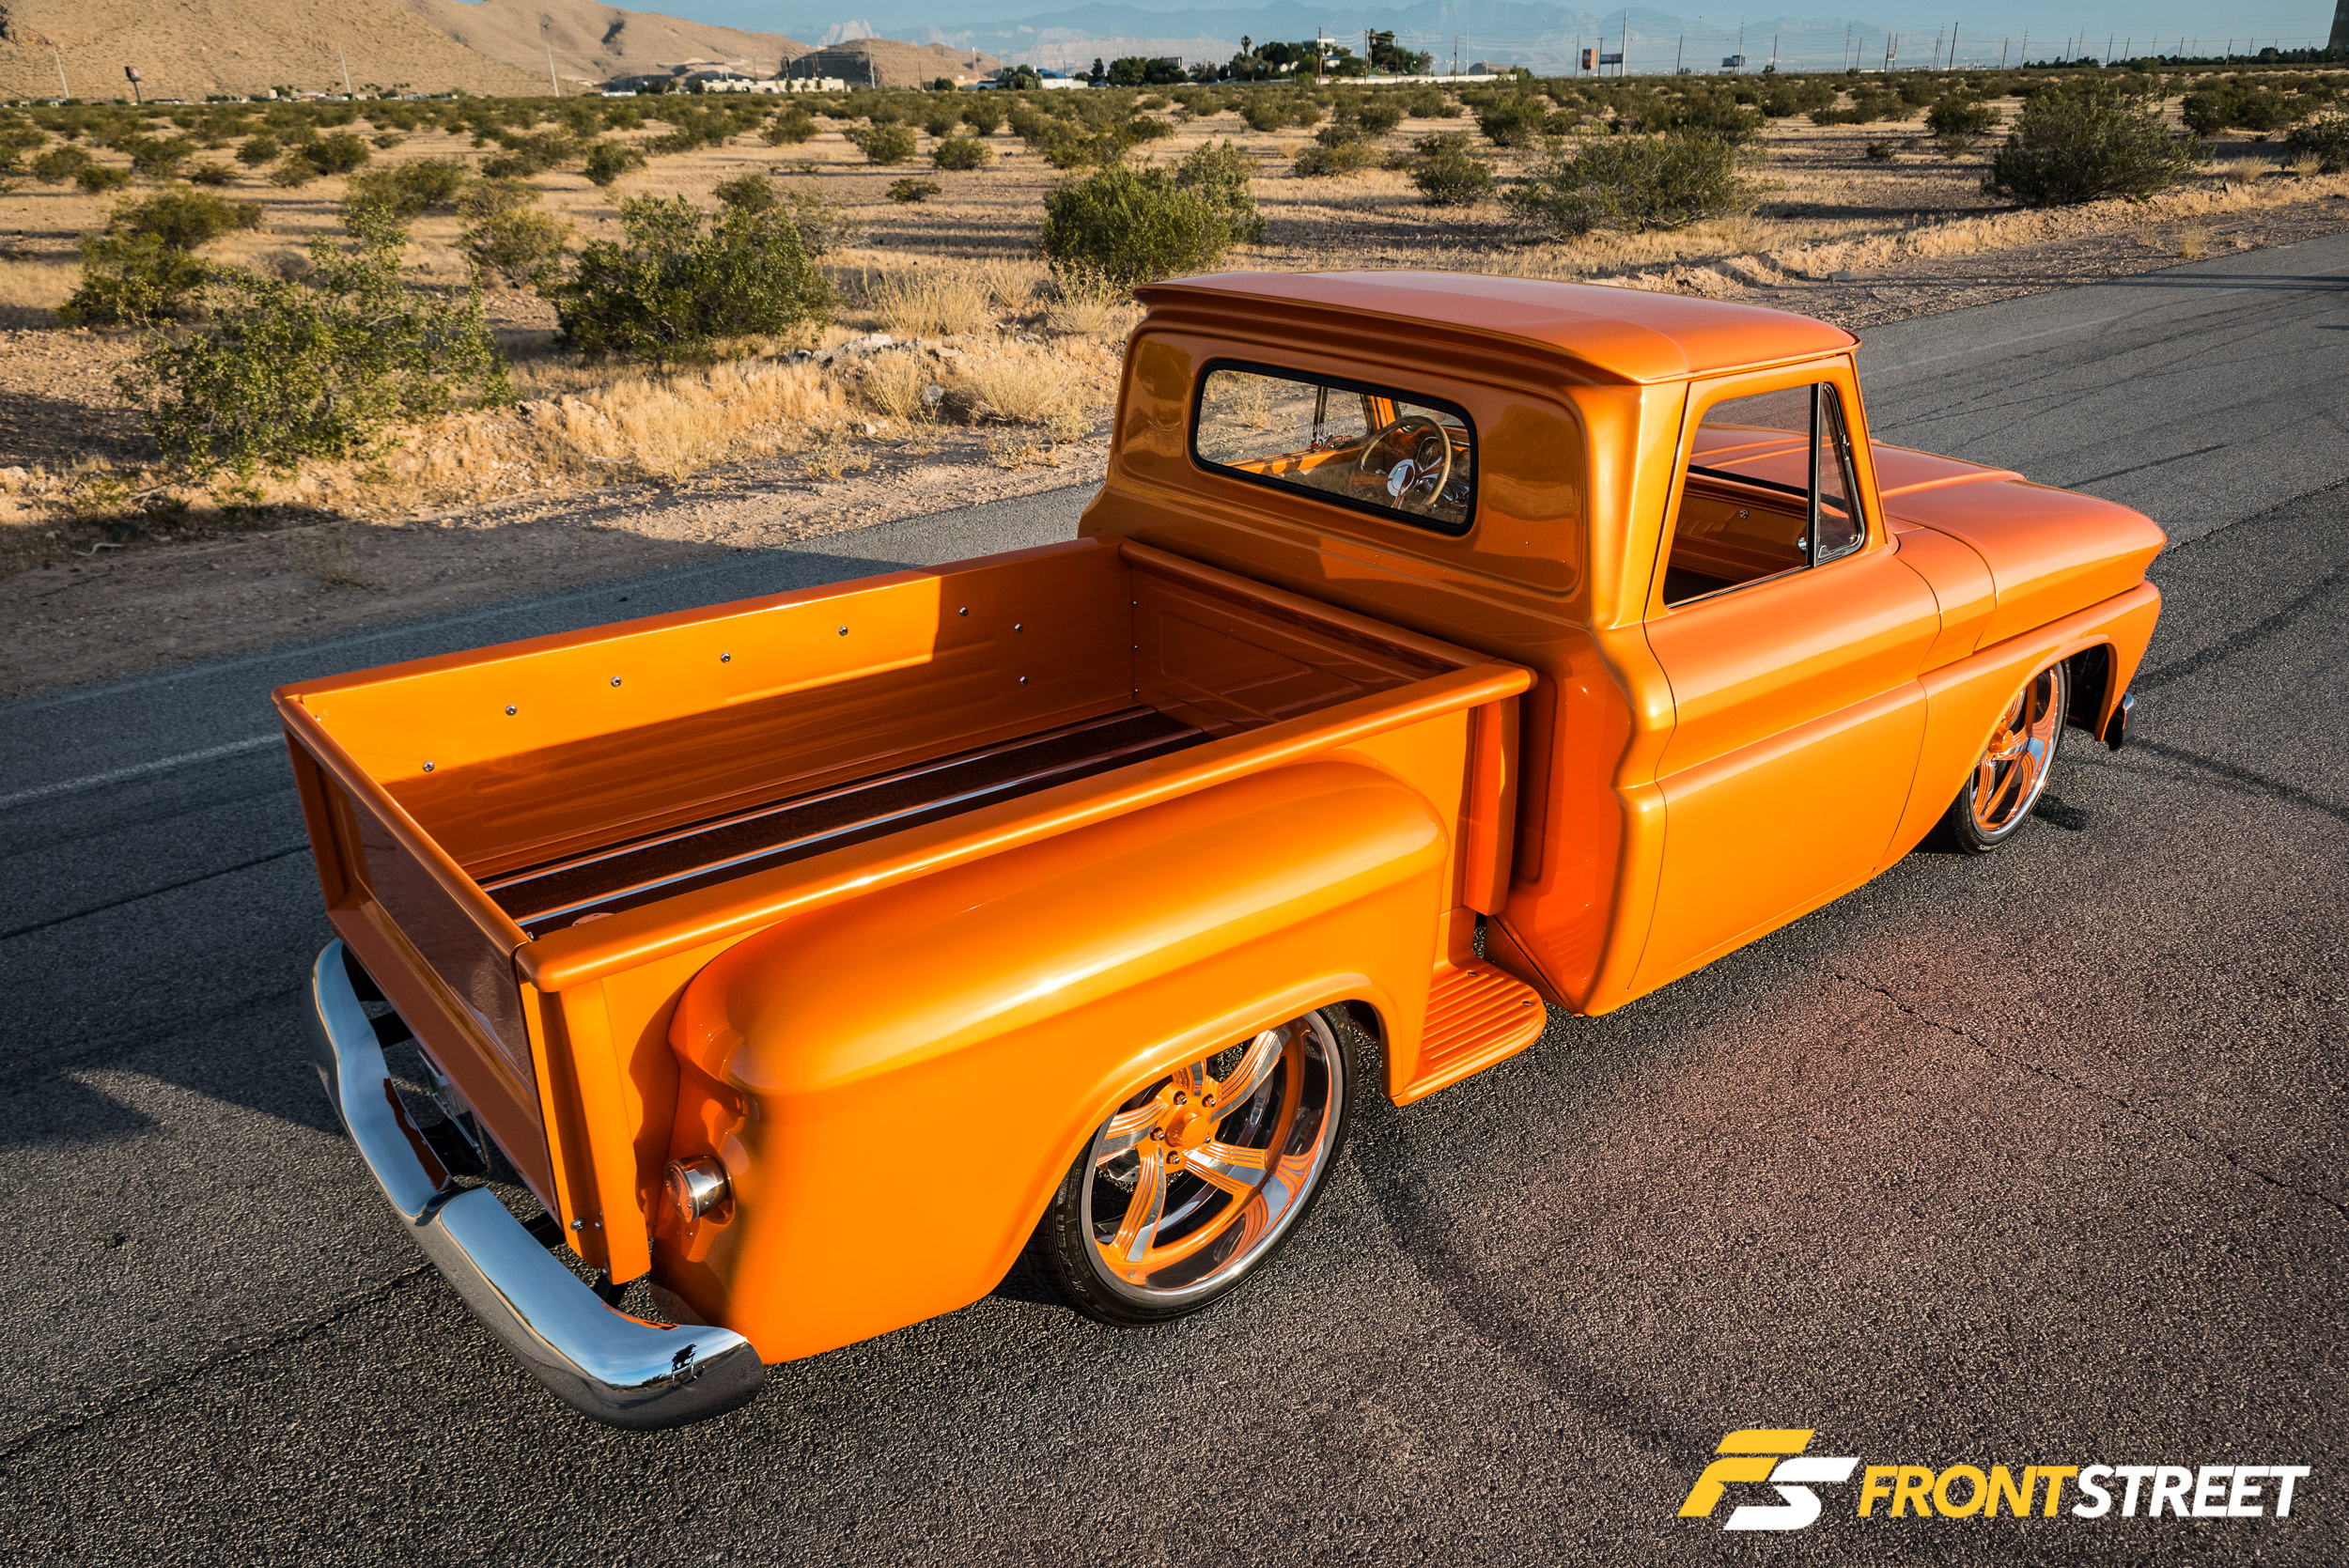 Heaven Bound: Yancey Taylor's Showstopping '66 Chevy C10 Pickup